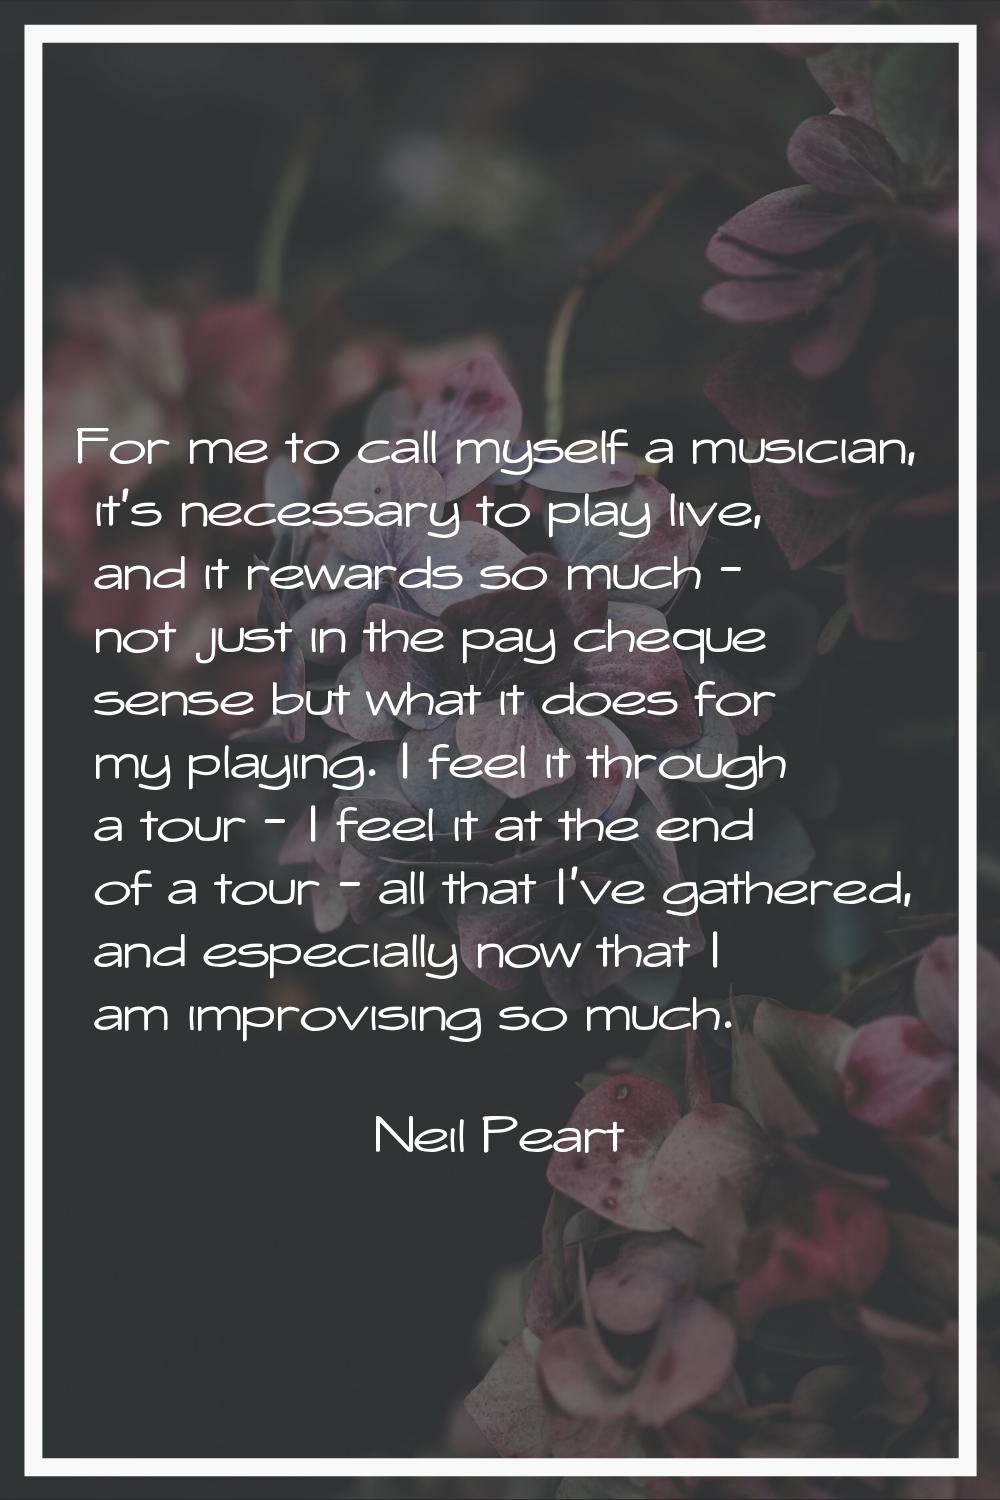 For me to call myself a musician, it's necessary to play live, and it rewards so much - not just in